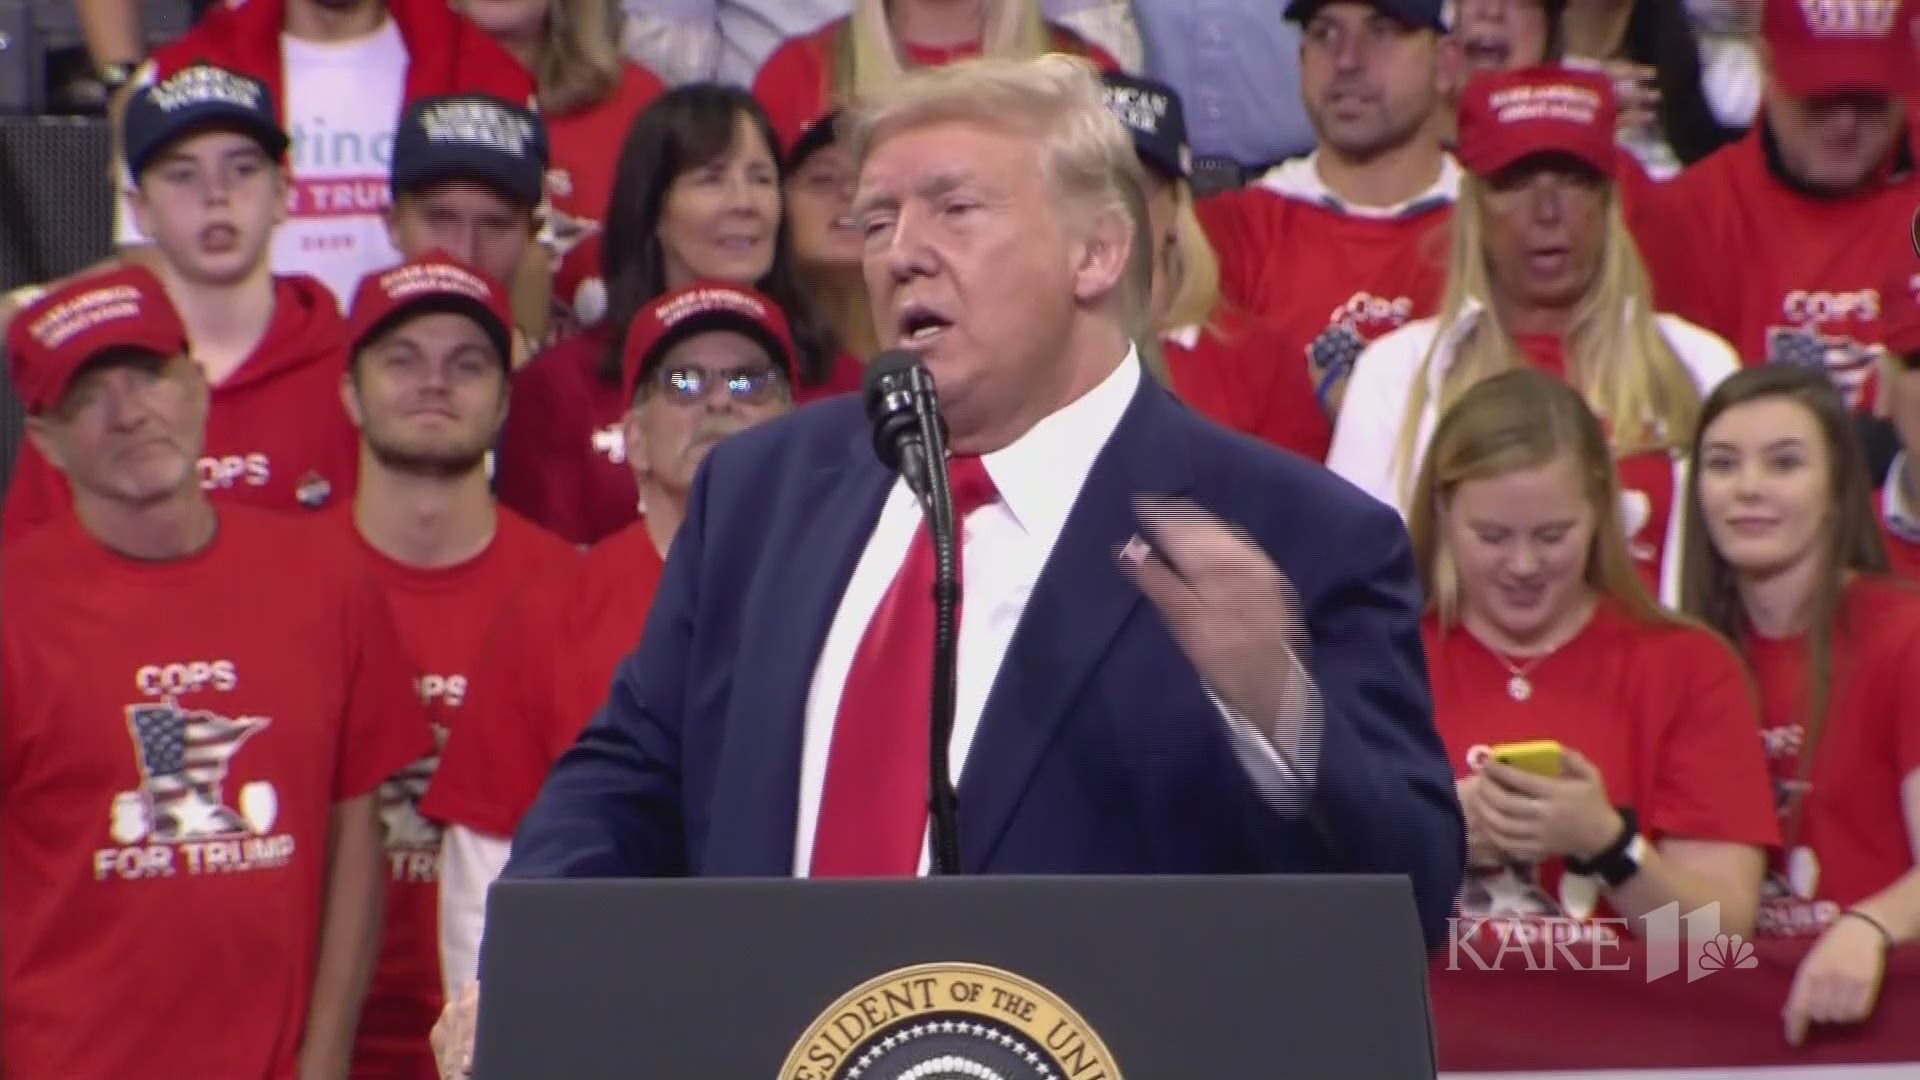 Pres. Trump made several claims about Minnesota Rep. Ilhan Omar during his Target Center rally.